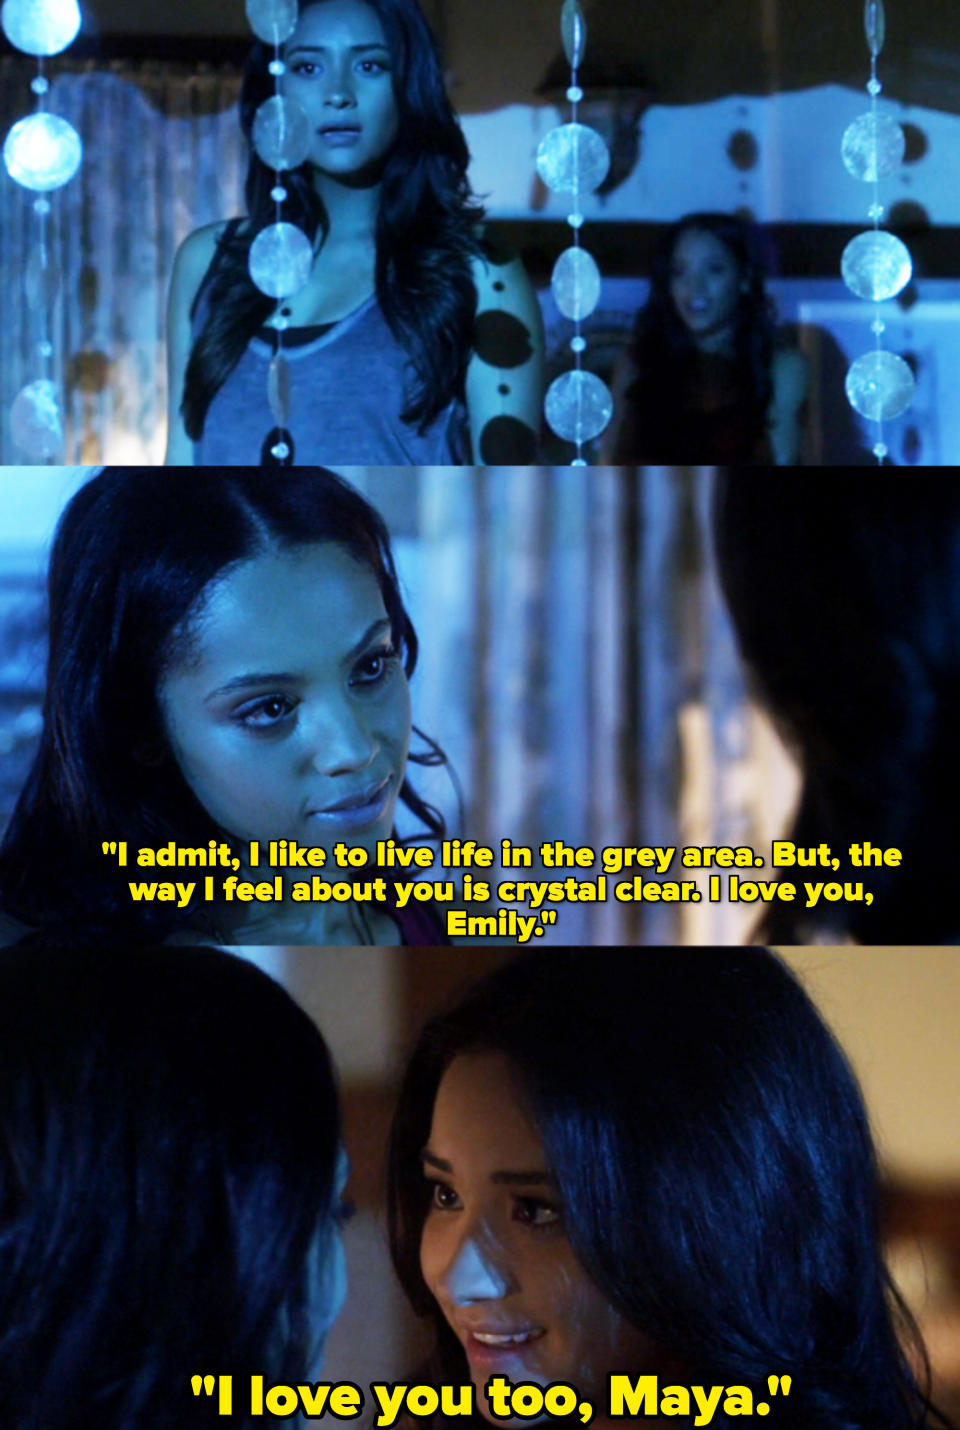 Emily Fields admires the hanging shiny decorations in her room, and Maya St. Germain exchanges "I love yous" with her